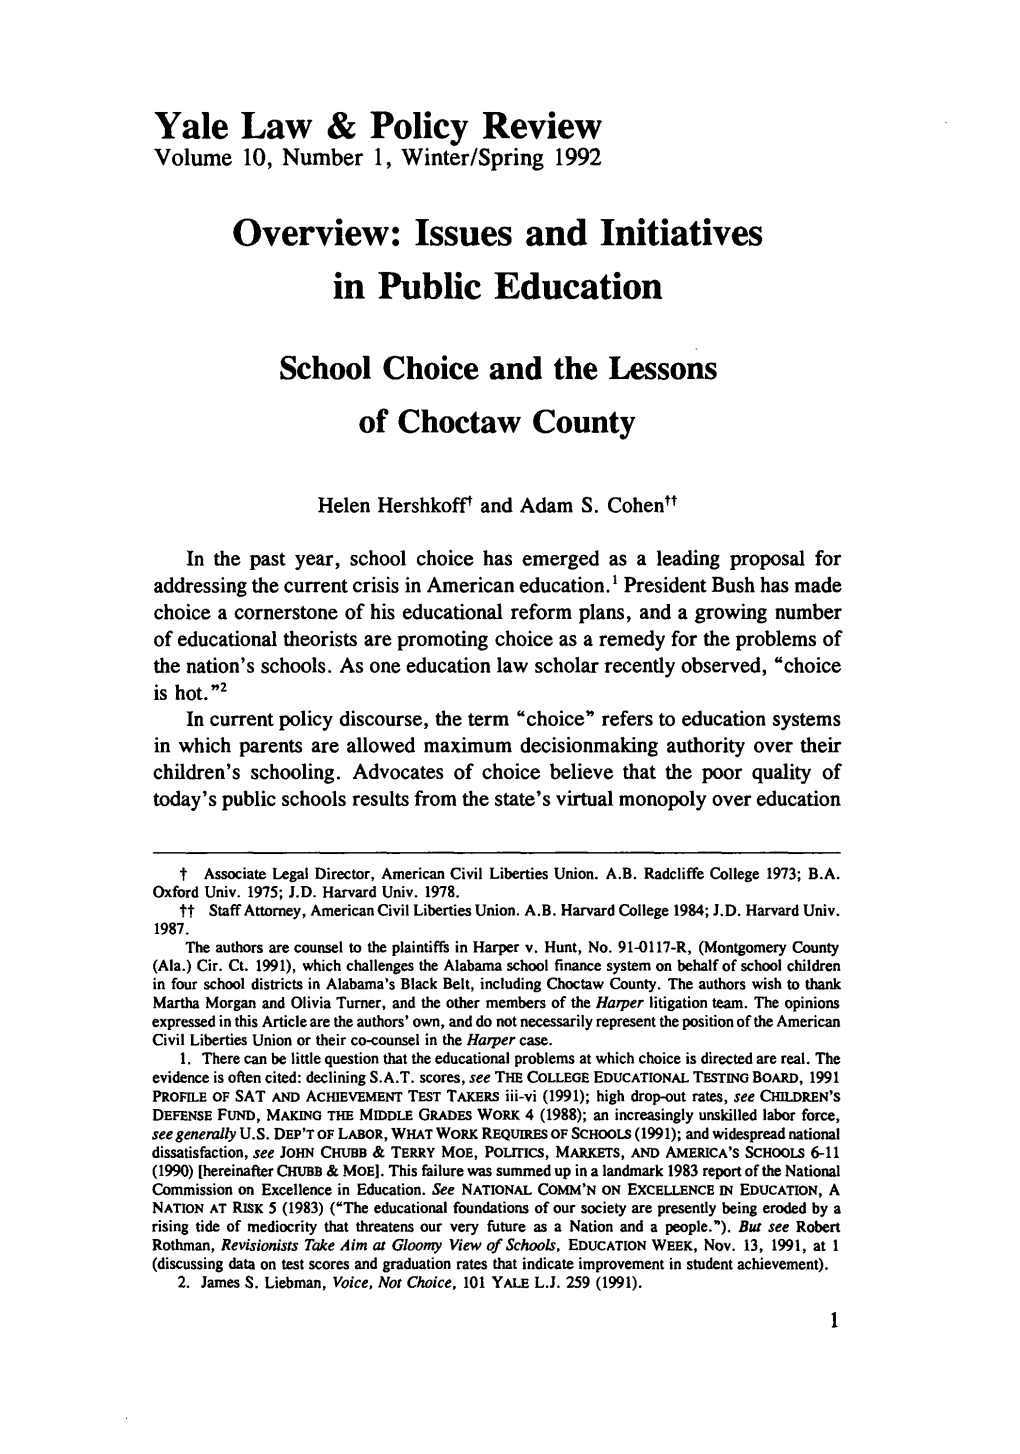 School Choice and the Lessons of Choctaw County